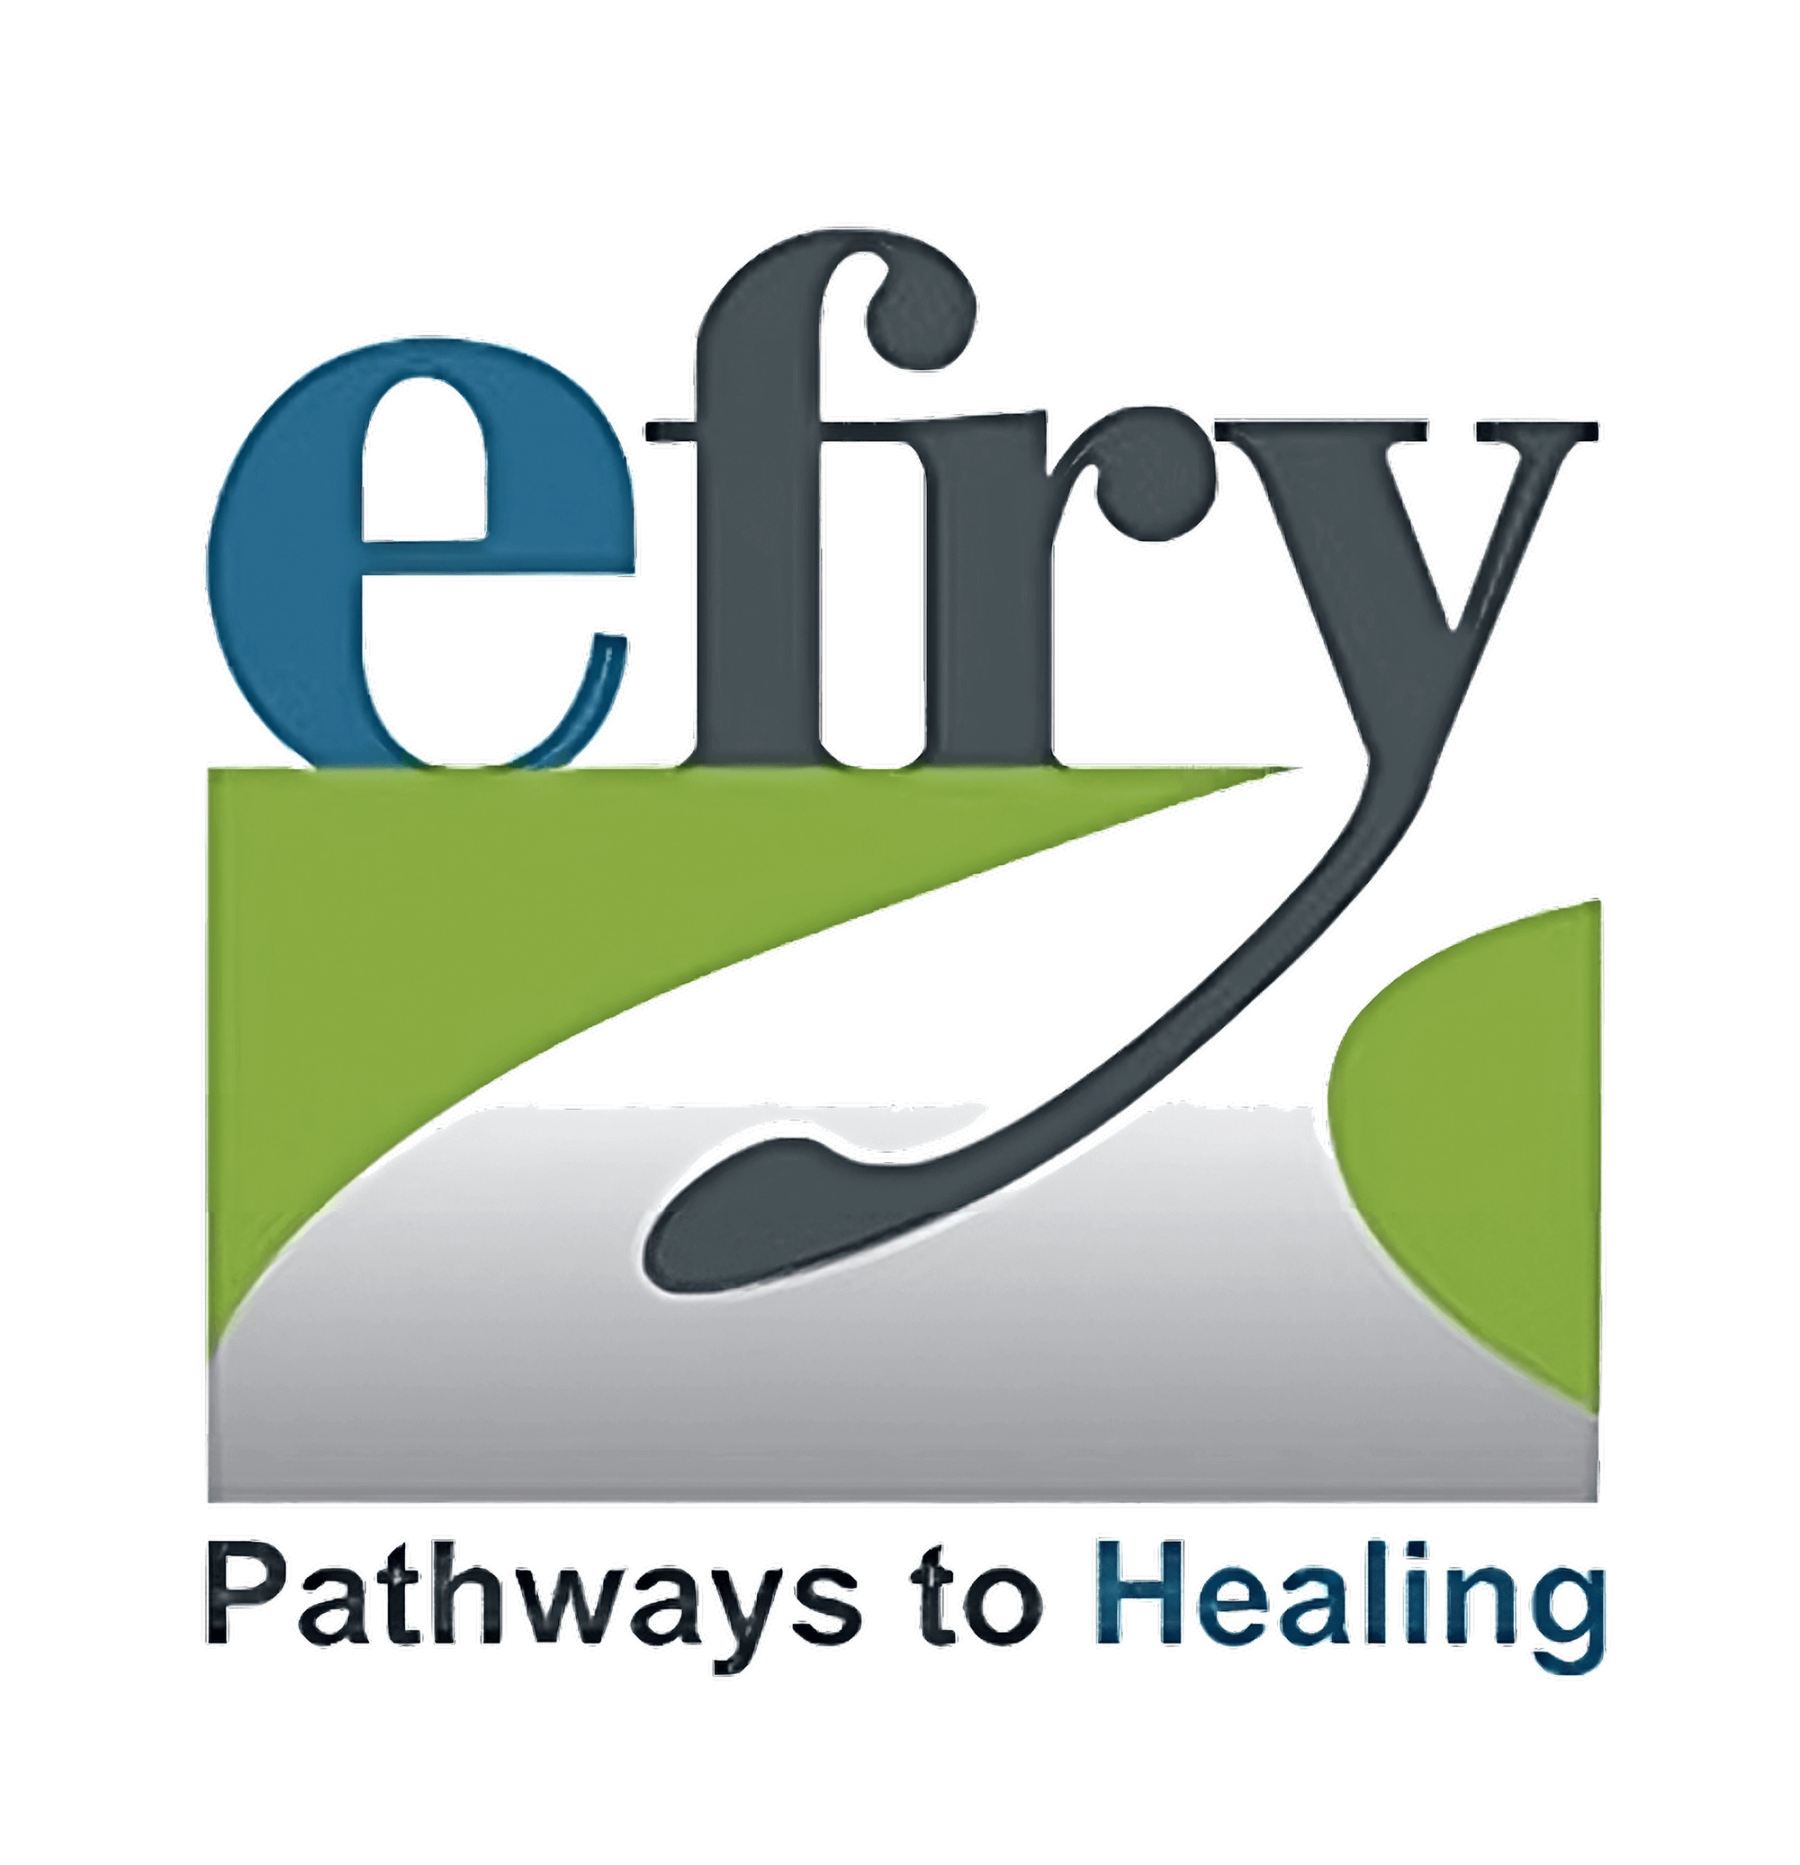 Logo for Elizabeth Fry: Pathways to Healing on a transparent background